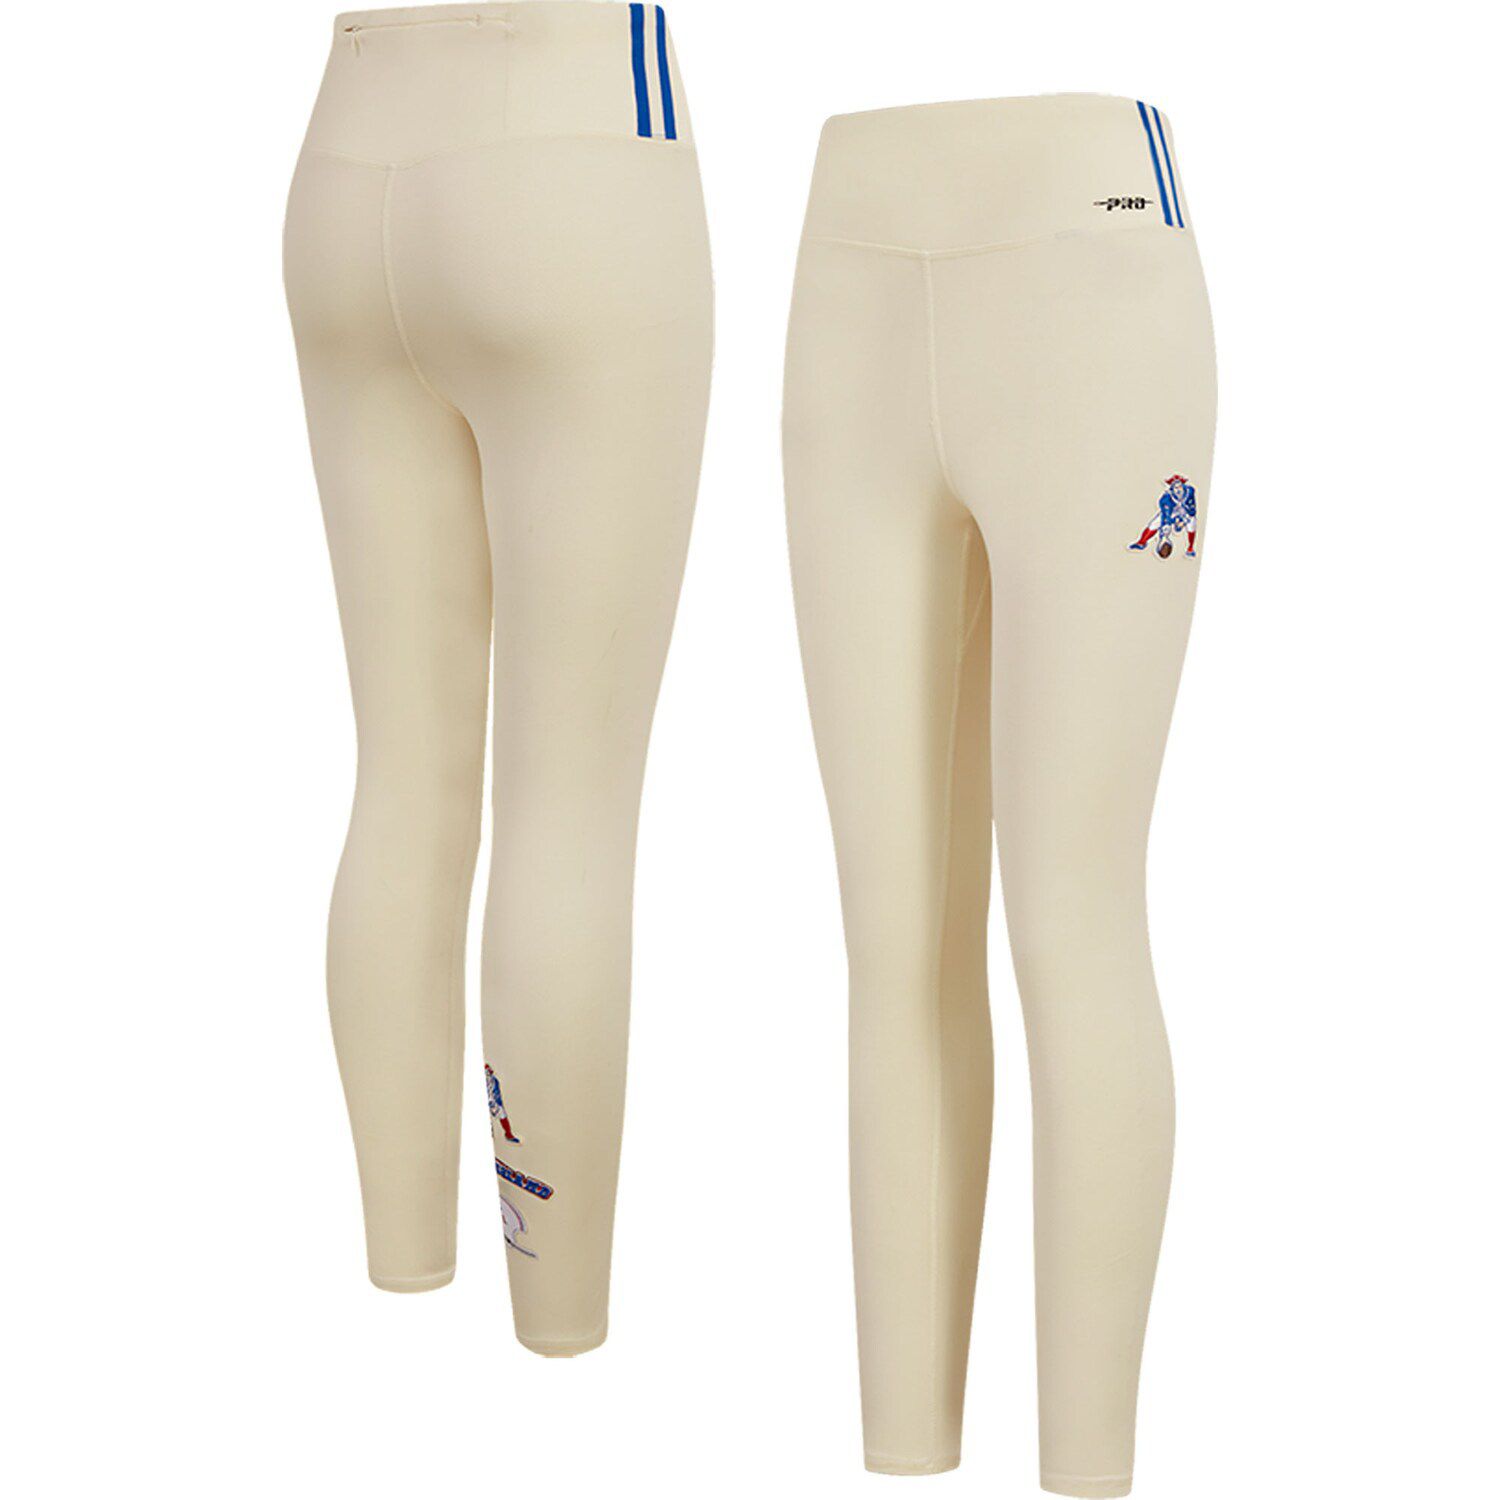 Women's Pro Standard Royal Indianapolis Colts Classic Jersey Leggings